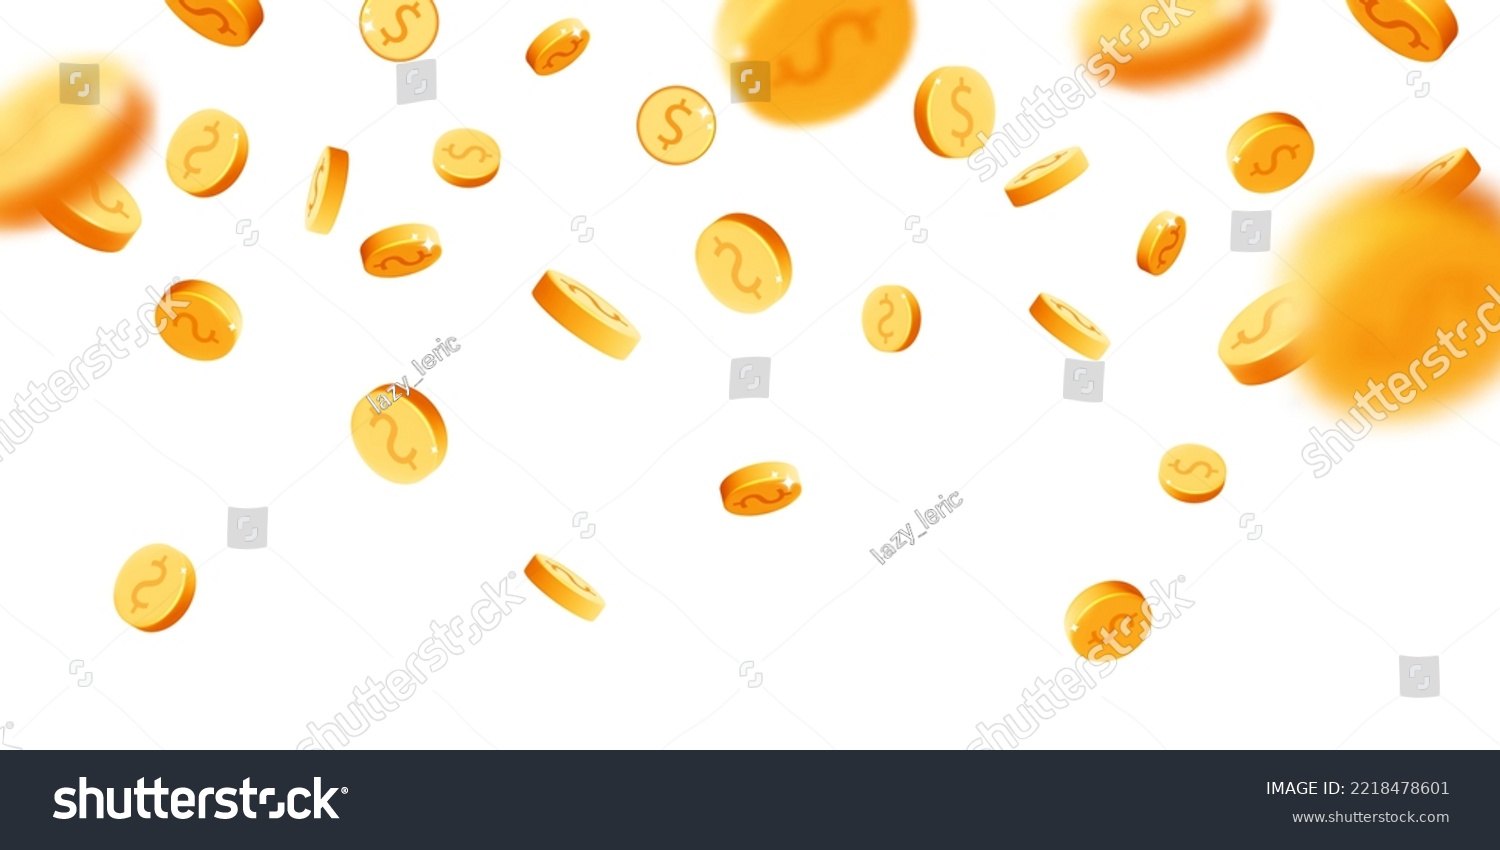 SVG of 3d vector gold rain coins floating in the air banner design. Realistic render falling down metal round dollars isolated on white background. Casino, jack pot, gold mine wealth, cash back concept. svg